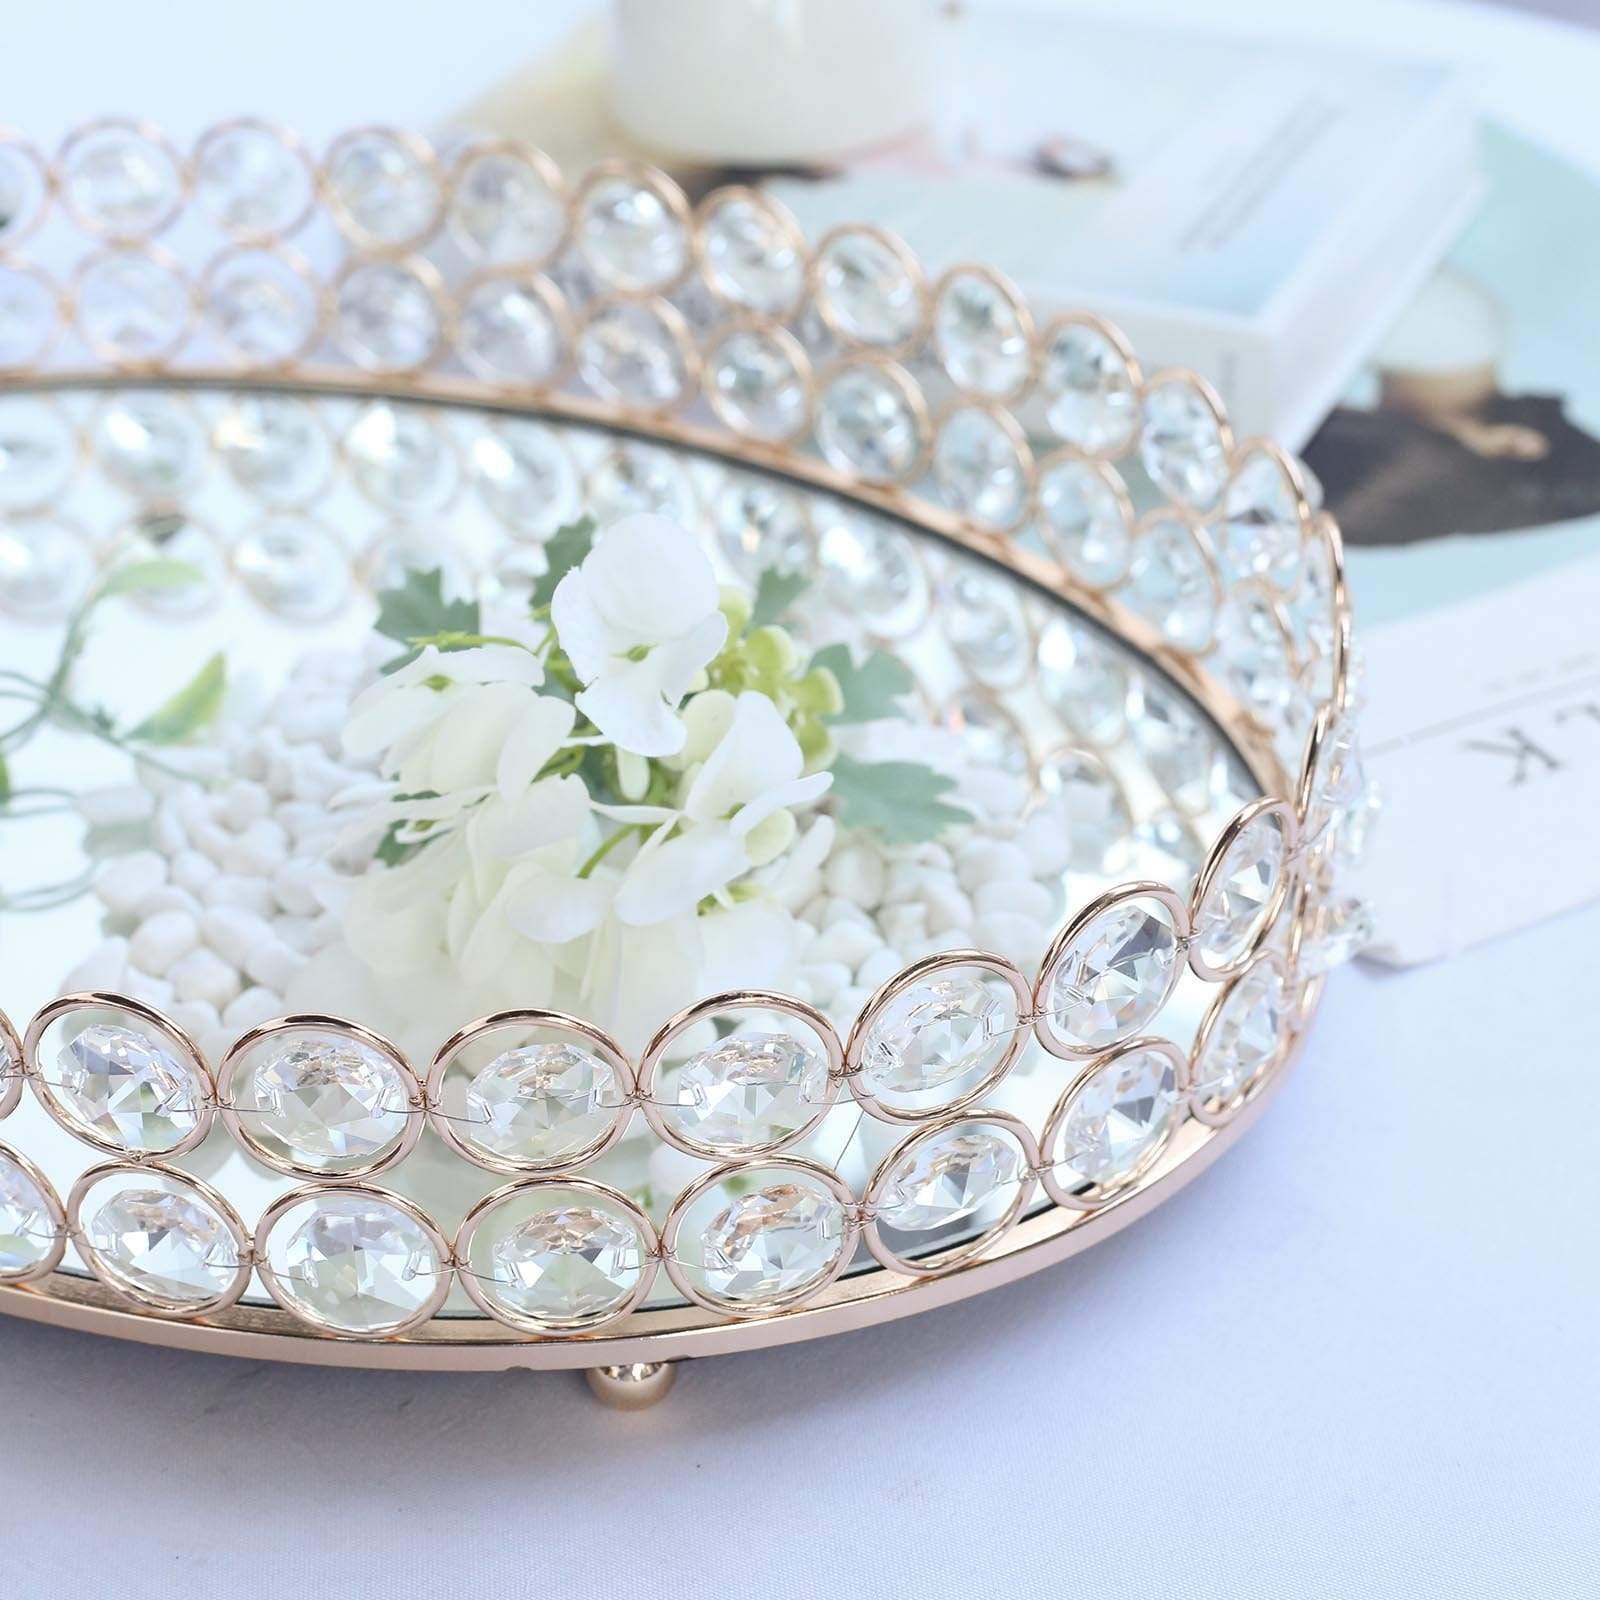 Gold Oval Metal with Crystal Beads Mirror Serving Tray